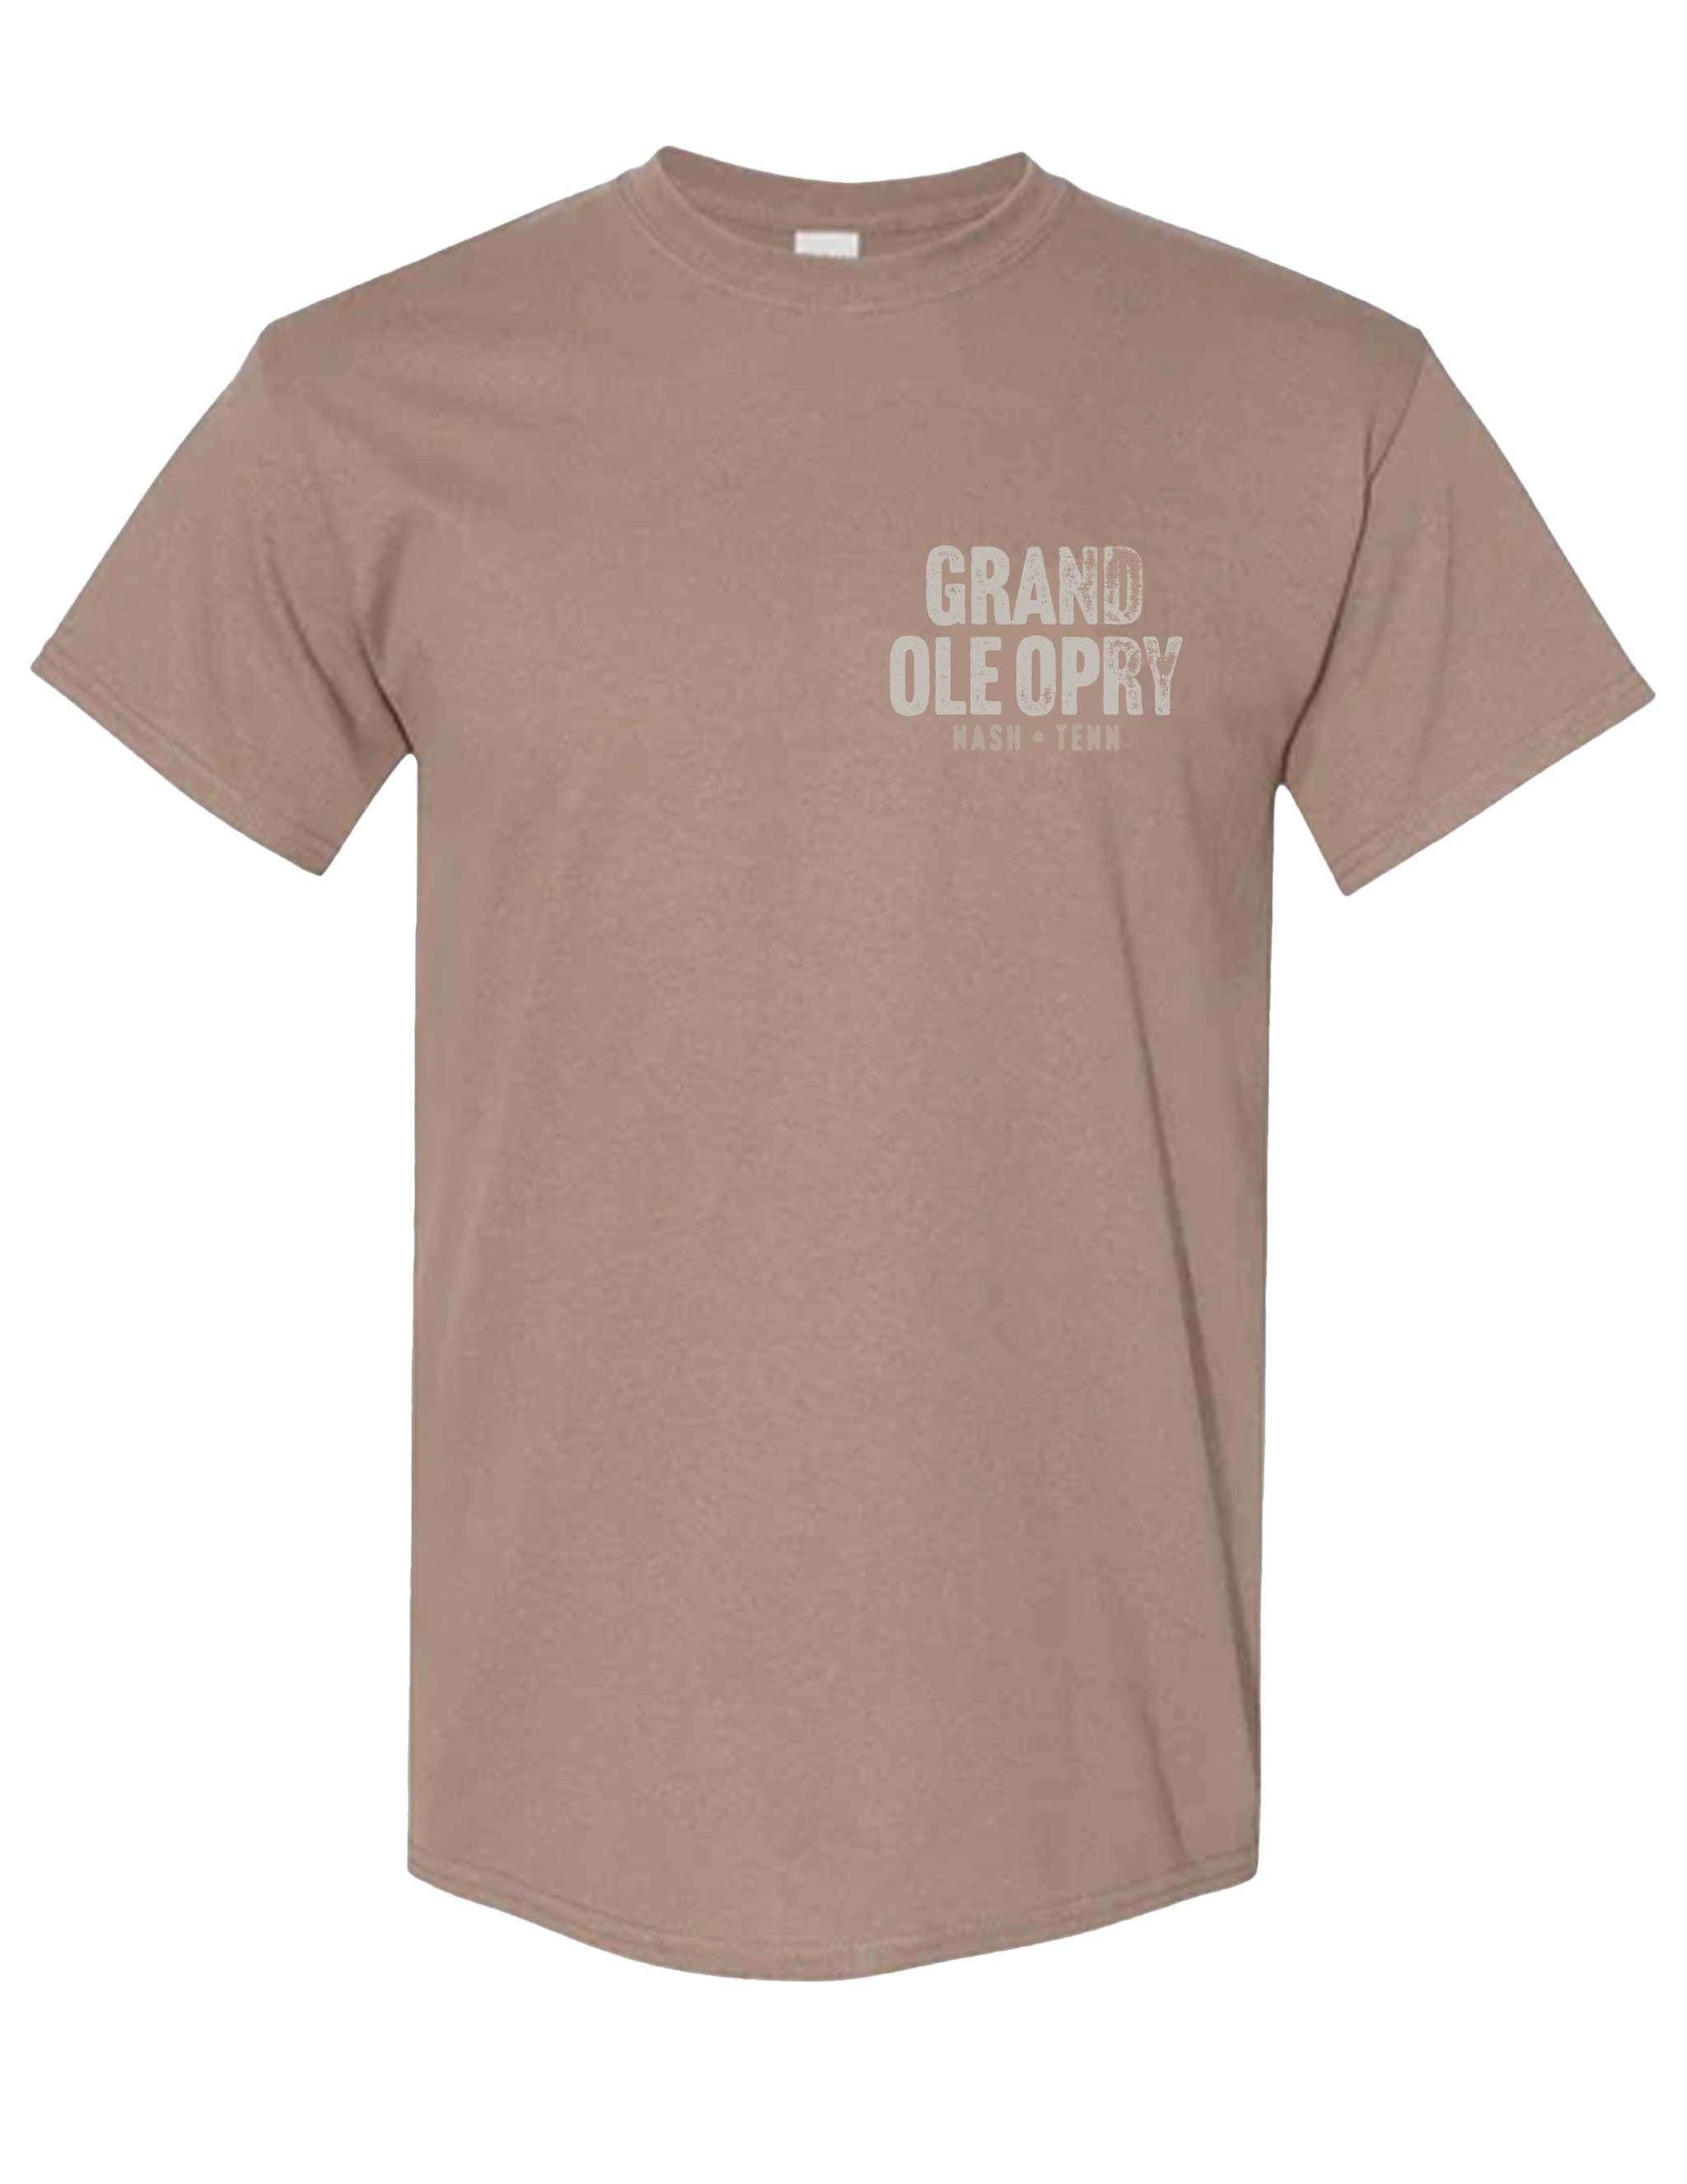 Opry Cowboy Famous Stage T-Shirt